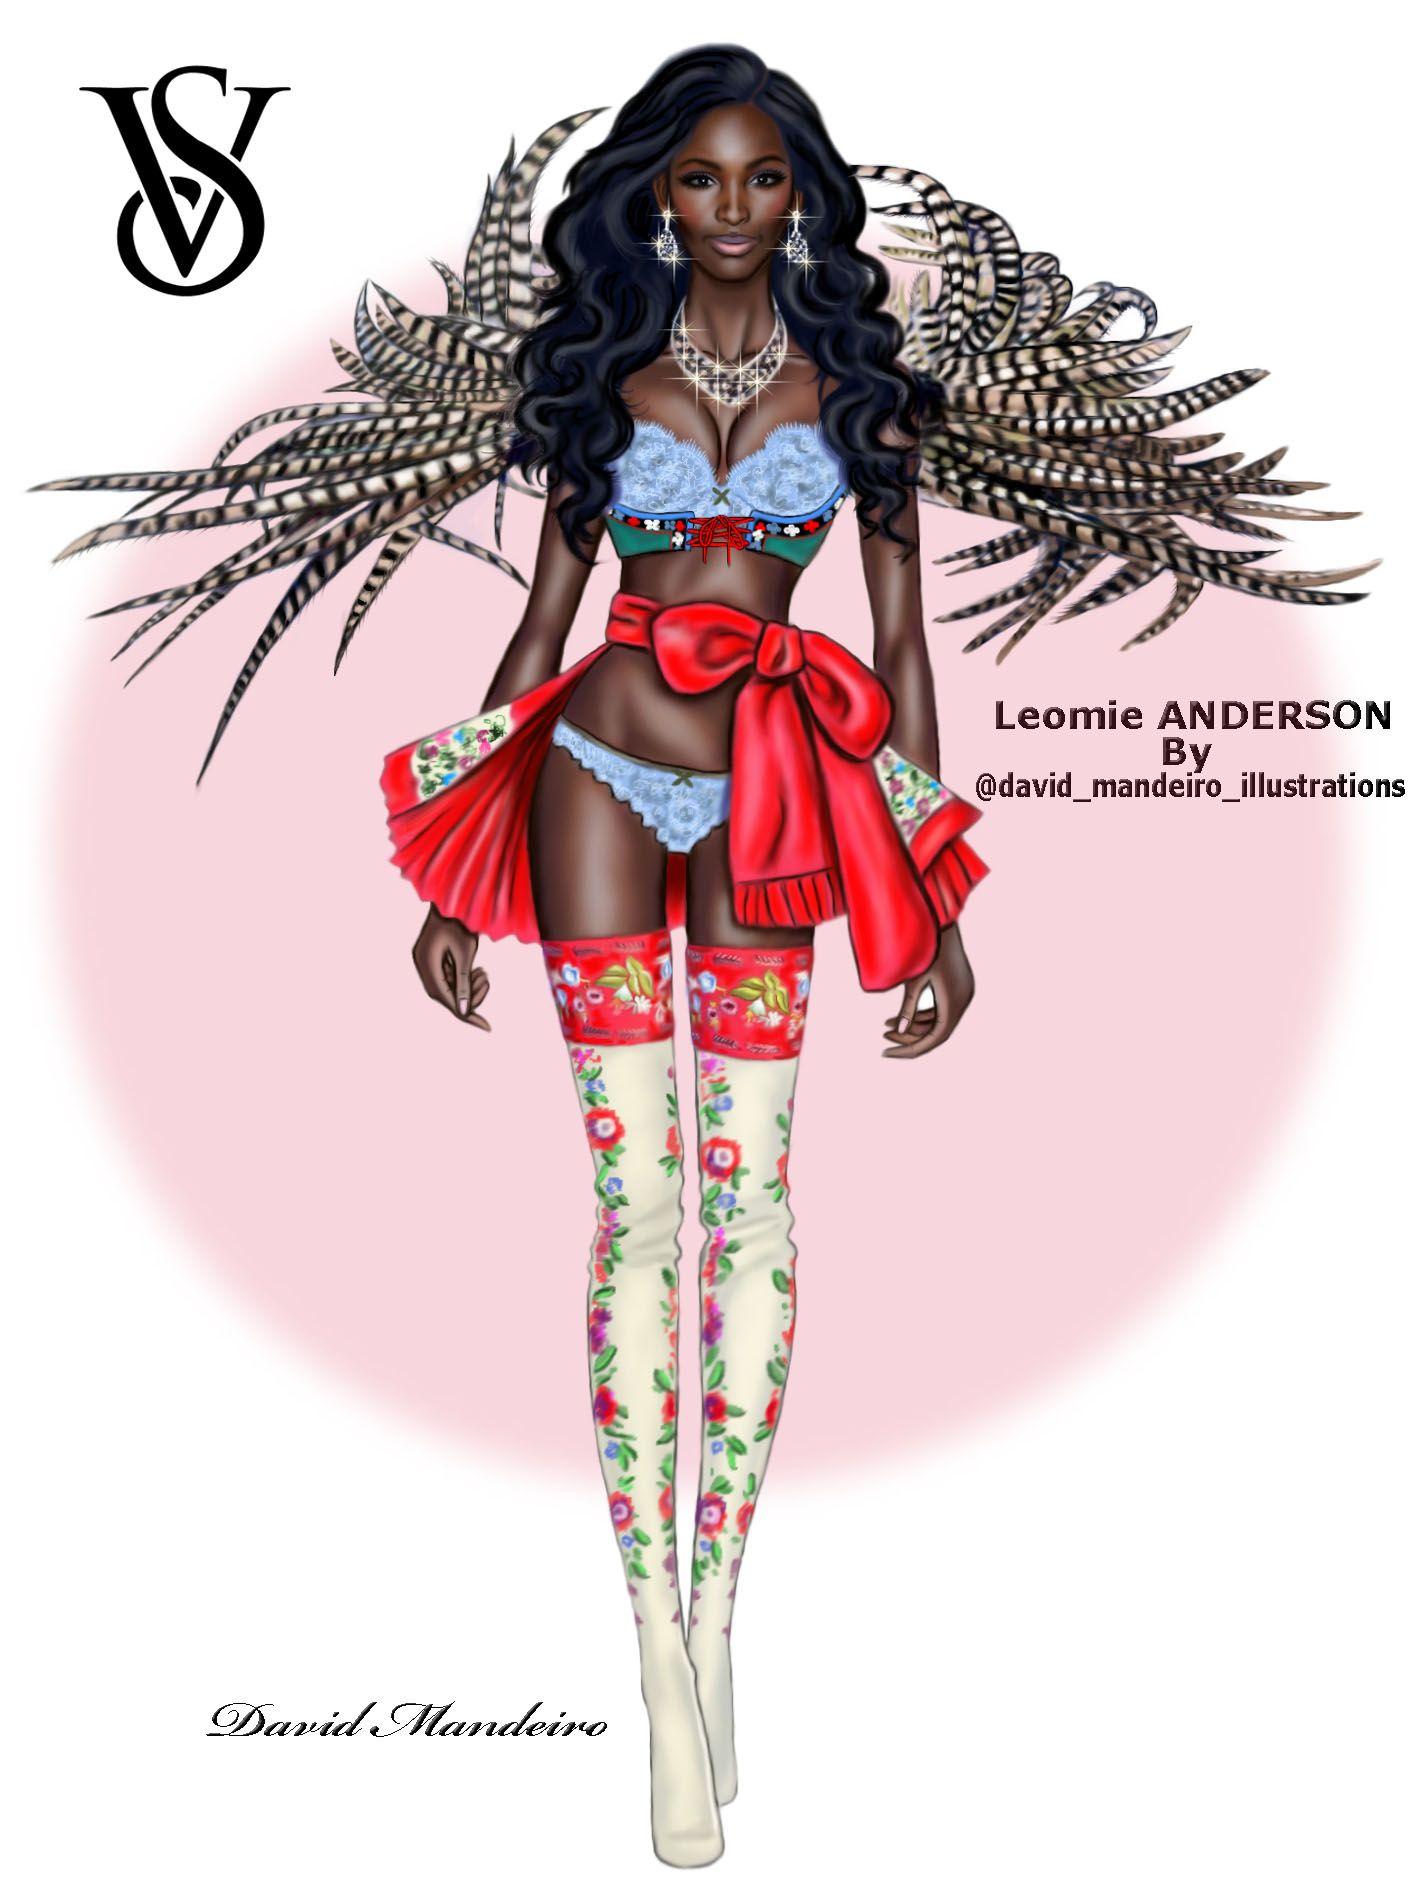 The beautiful Leomie Anderson at the Victoria's Secret Fashion Show